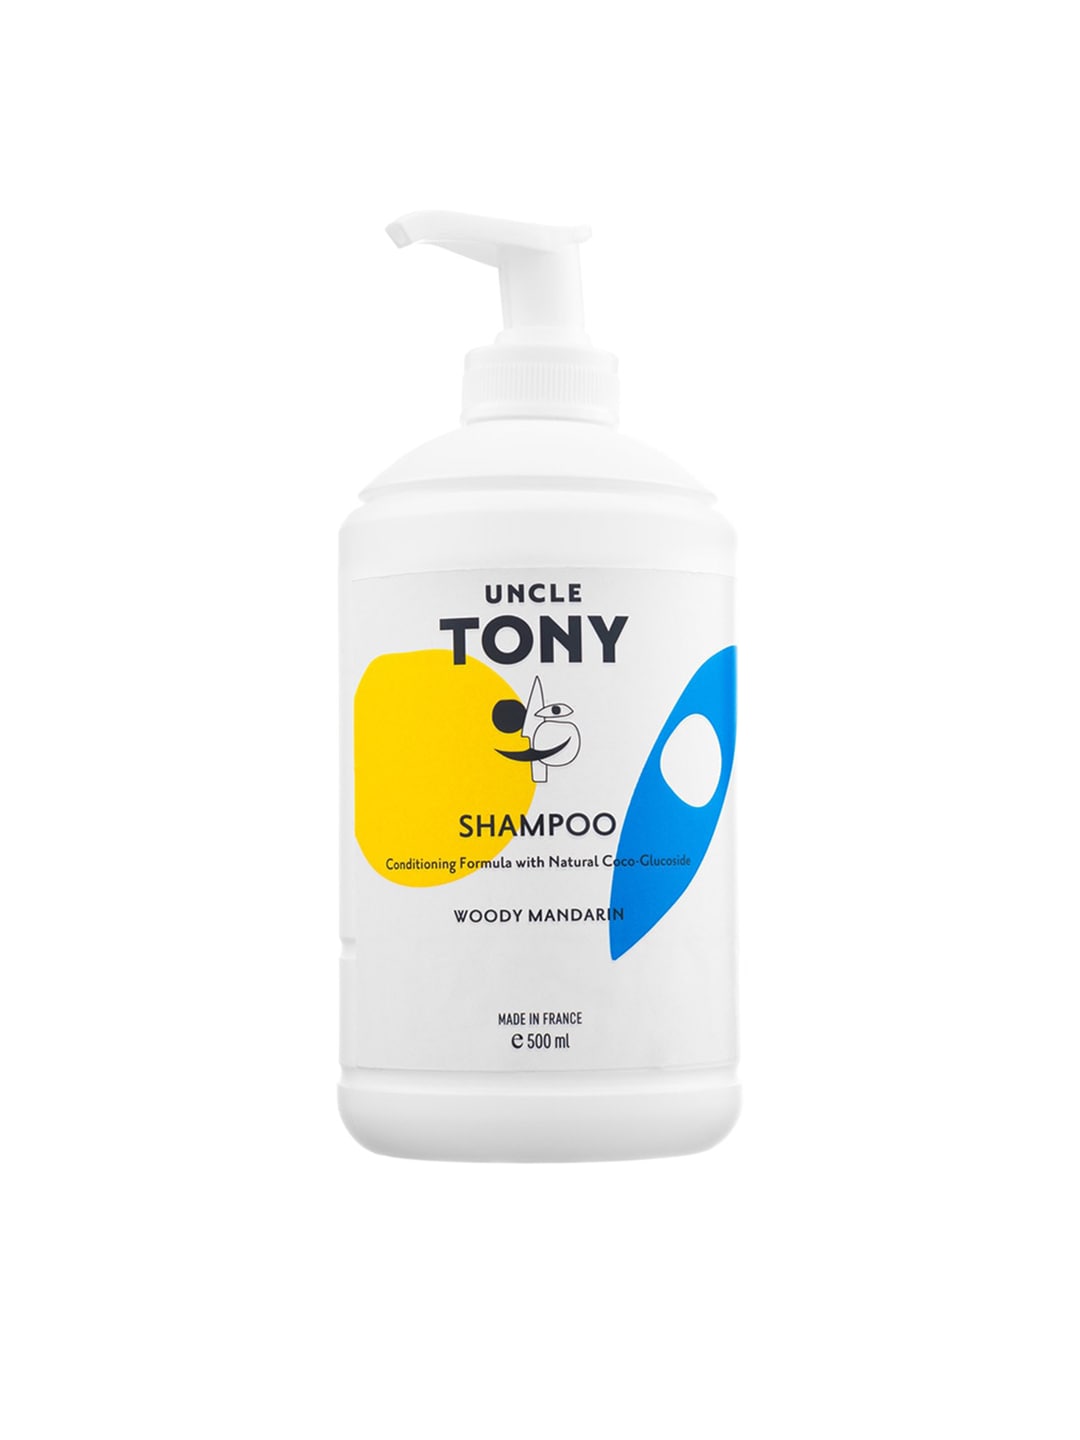 UNCLE TONY Woody Mandarin Shampoo with Natural Coco-Glucoside 500 ml Price in India